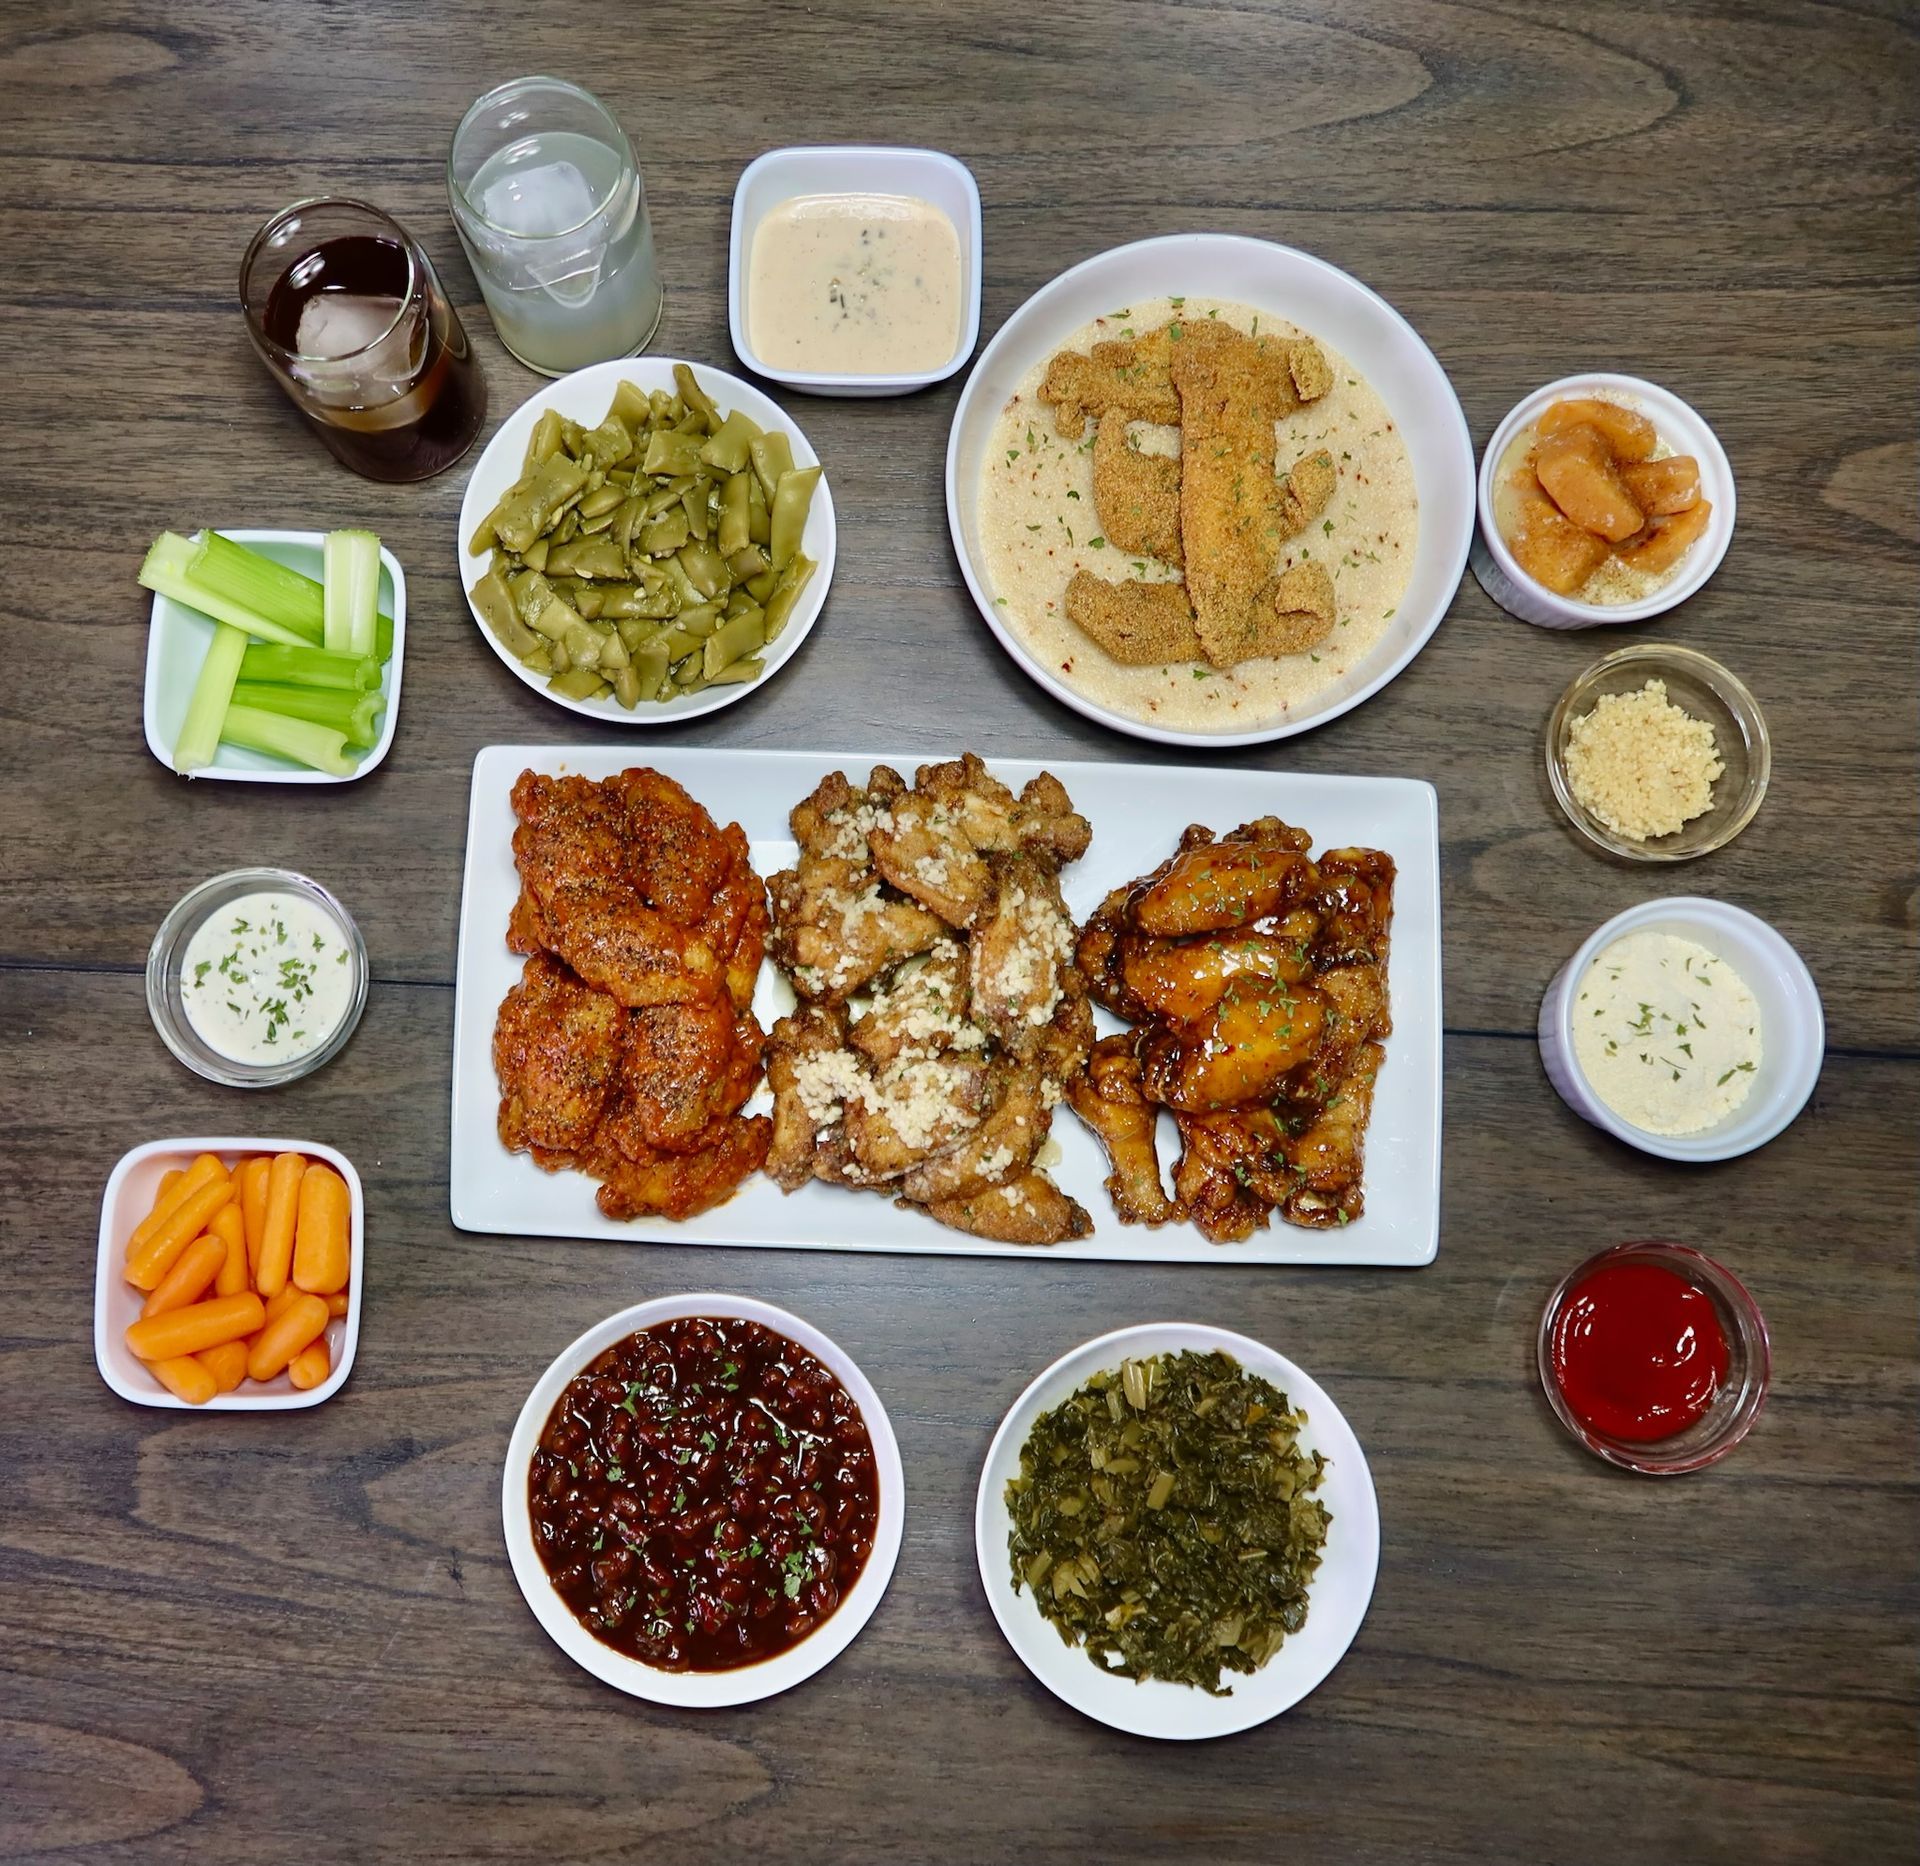 A wooden table topped with plates of food including chicken wings and vegetables.